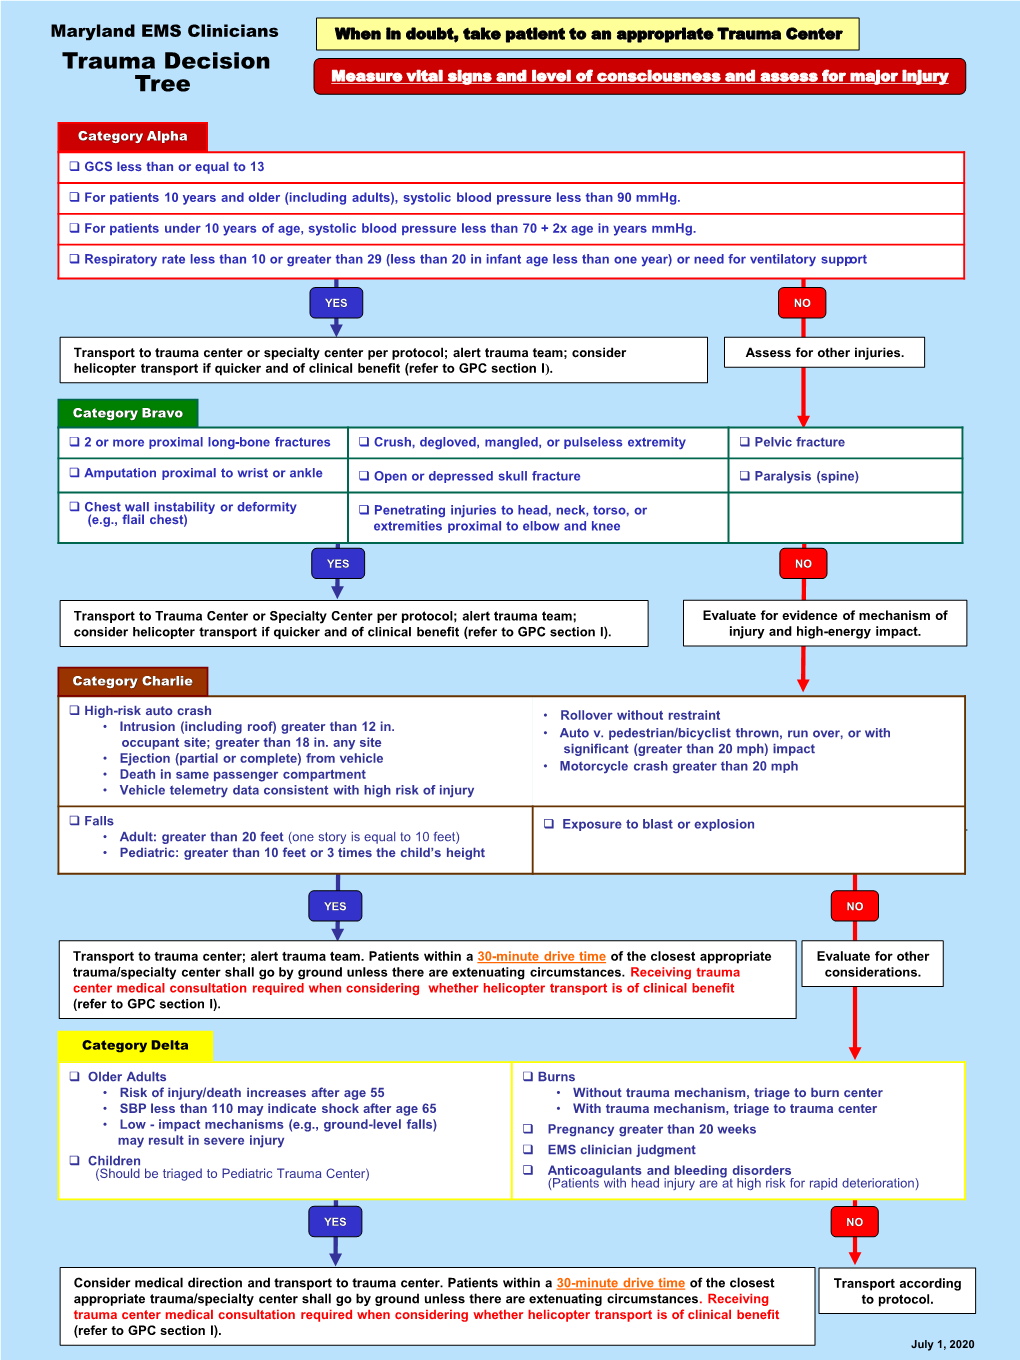 Trauma Decision Tree Measure Vital Signs and Level of Consciousness and Assess for Major Injury